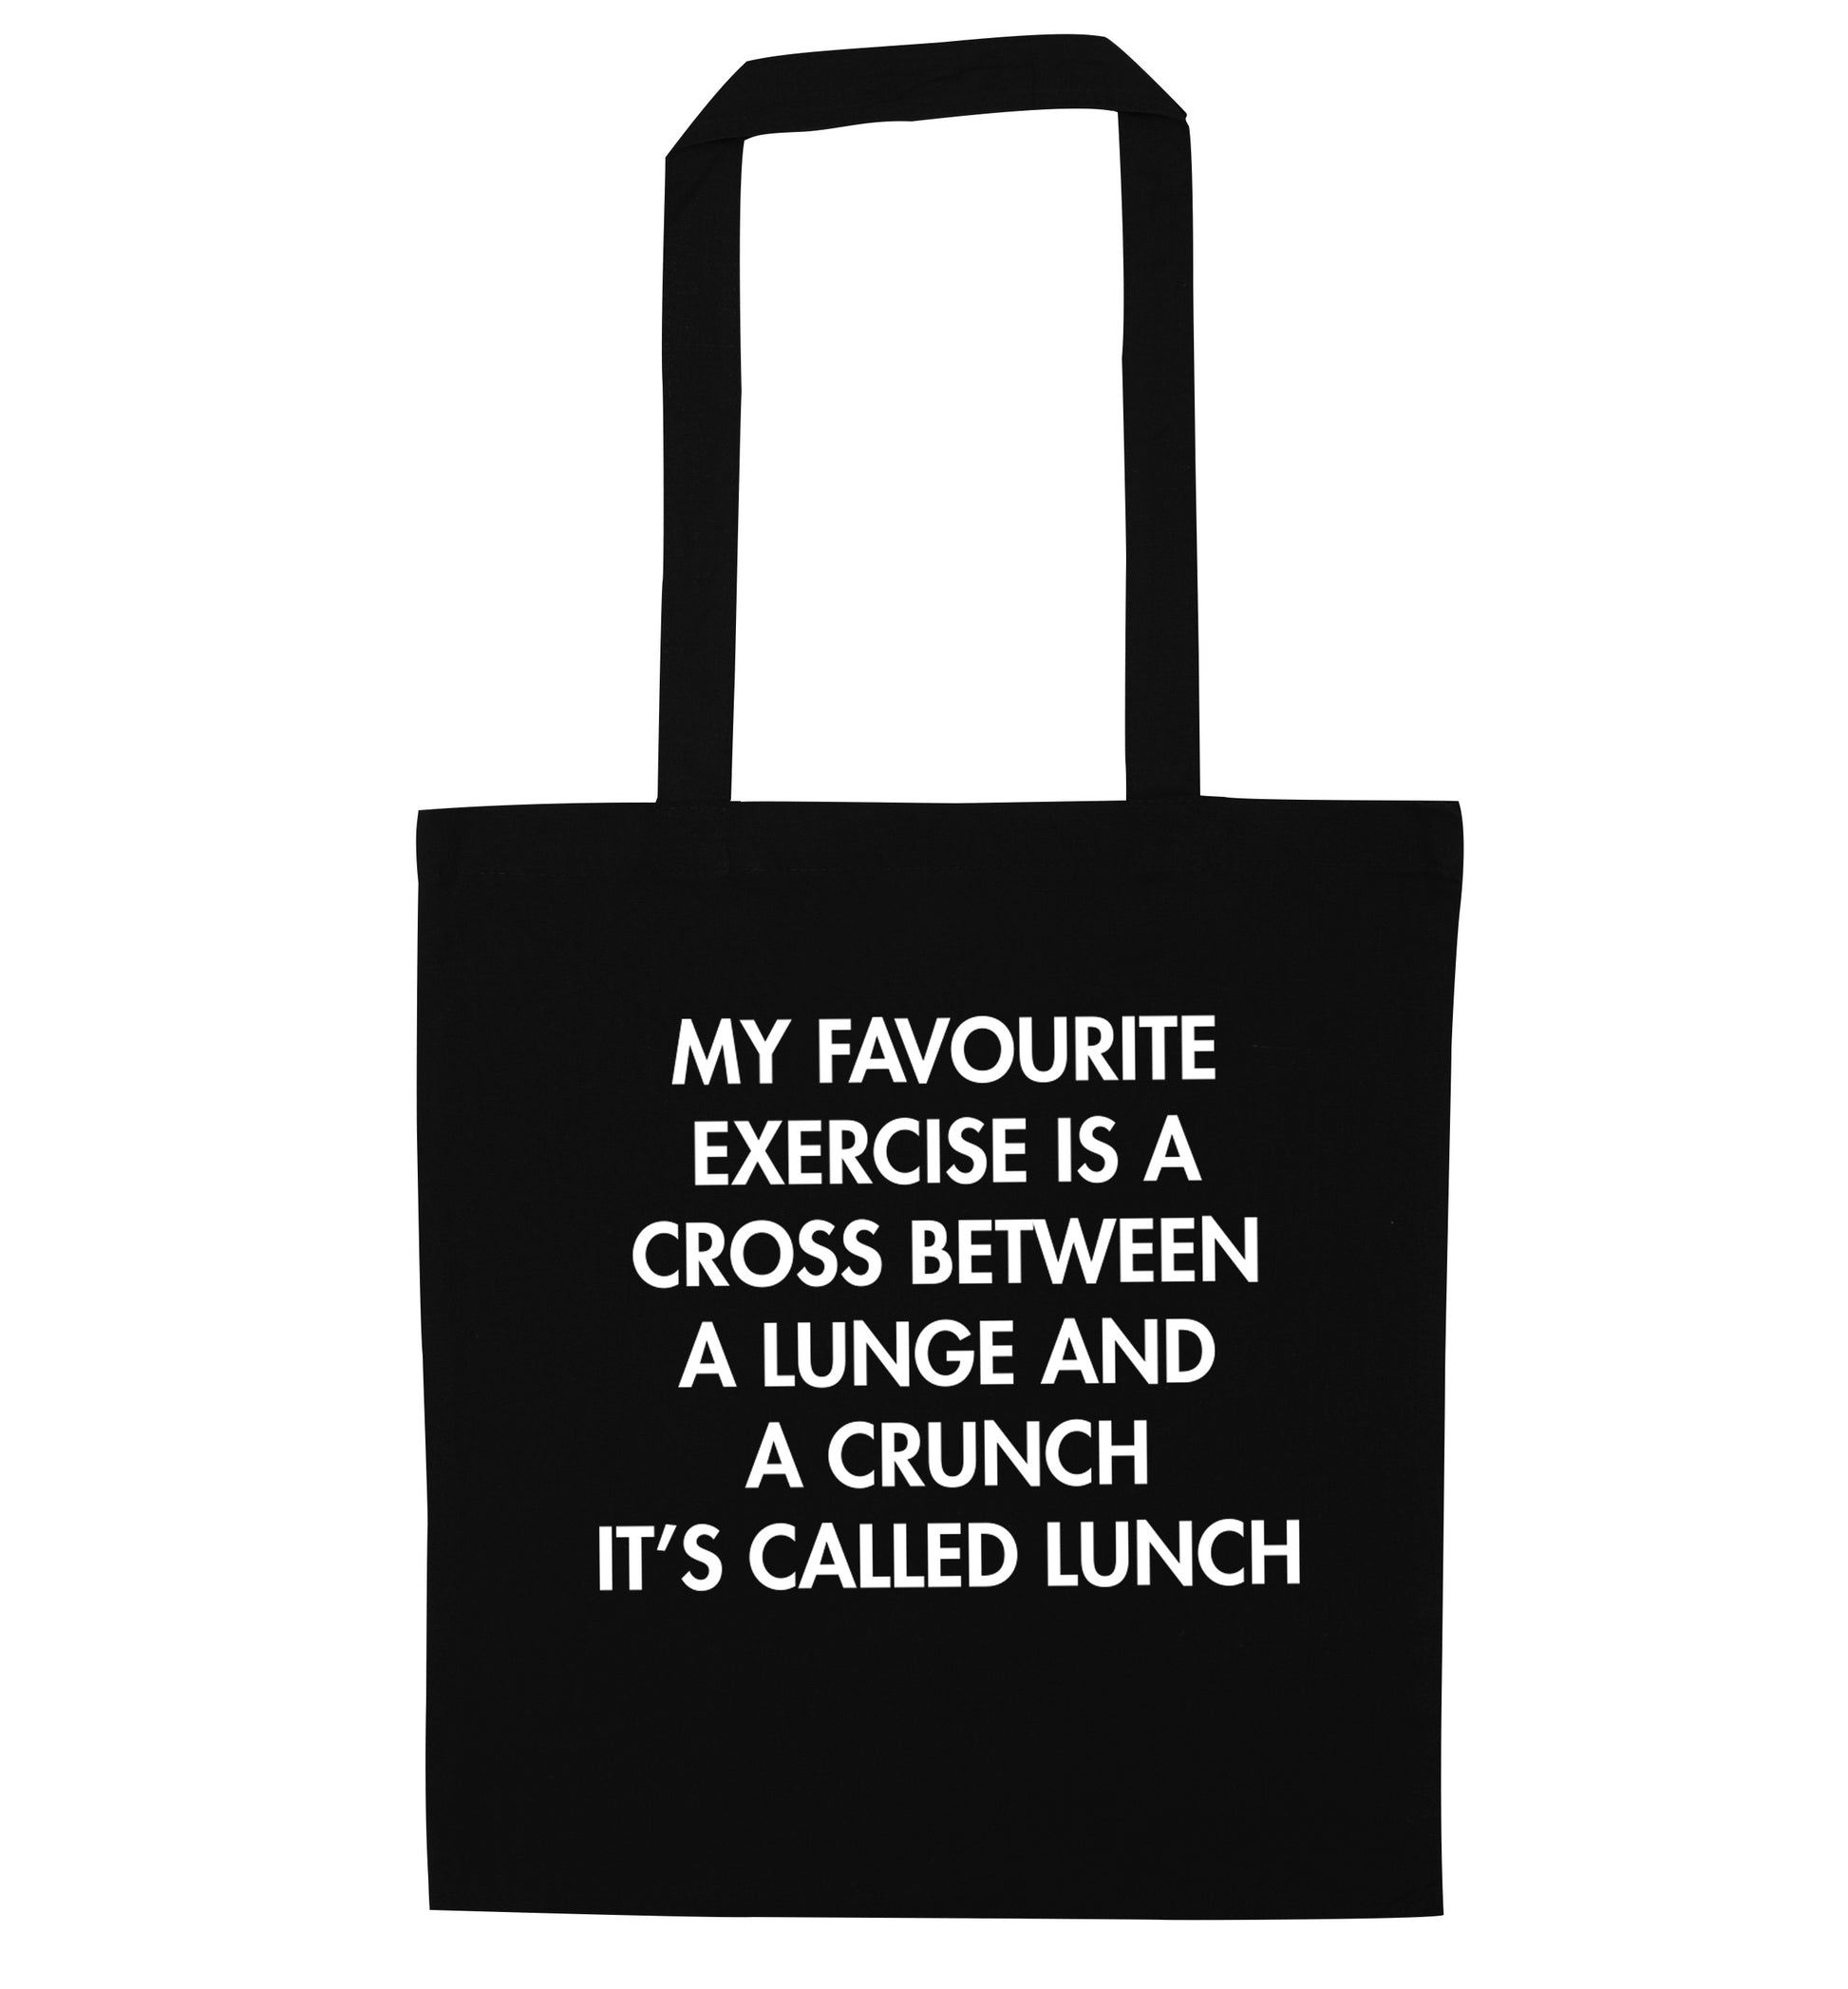 My favourite exercise is a cross between a lung and a crunch it's called lunch black tote bag